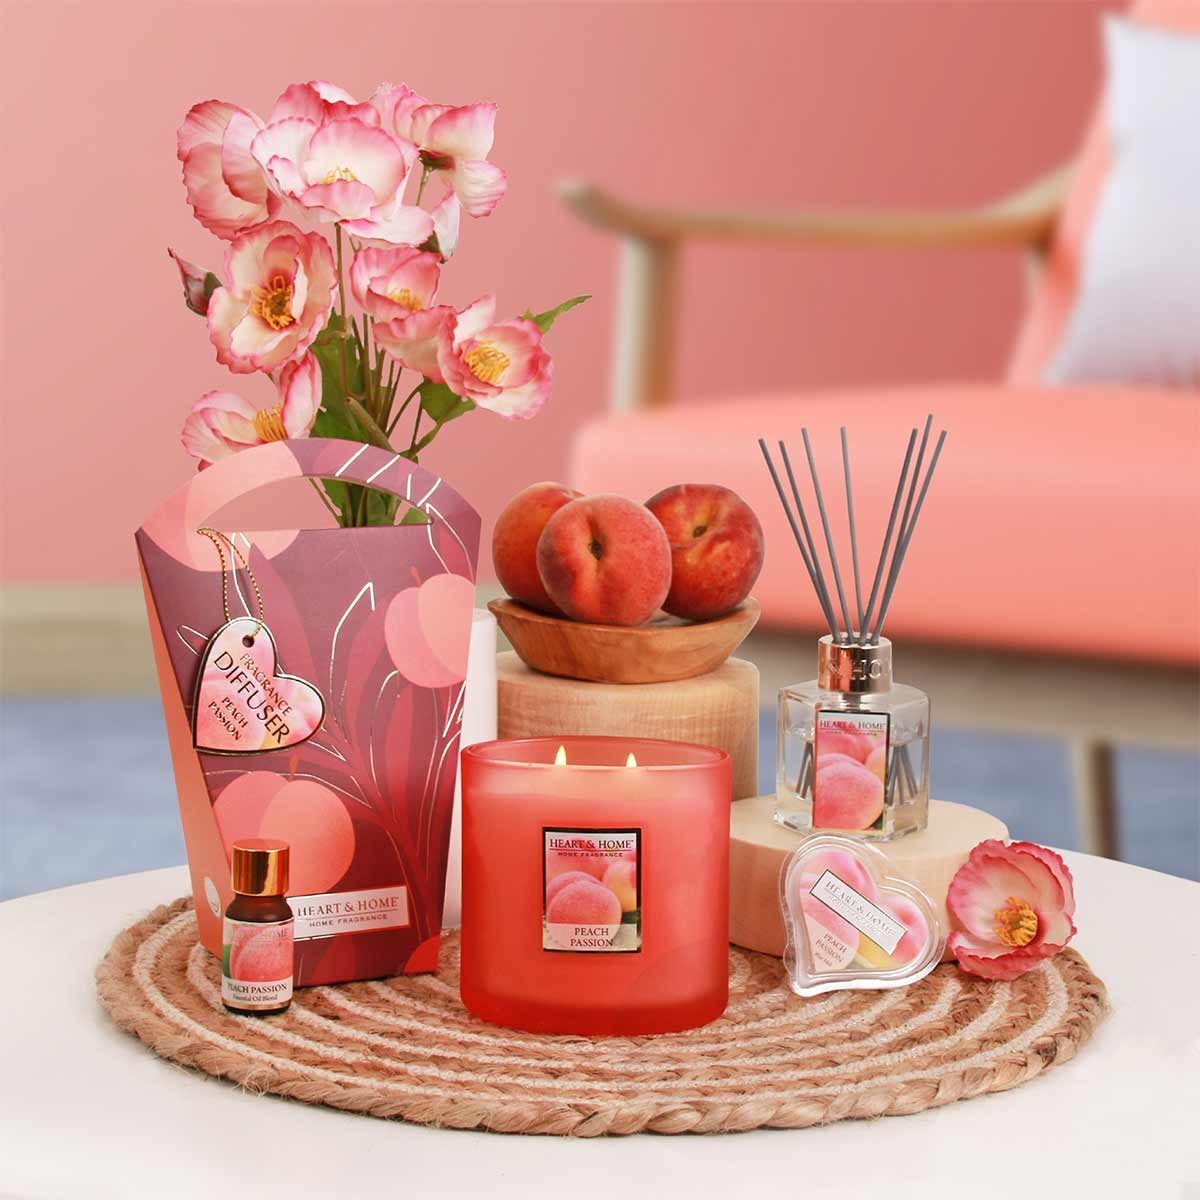 Mlange d'huiles essentielles Heart and Home Pche Passion